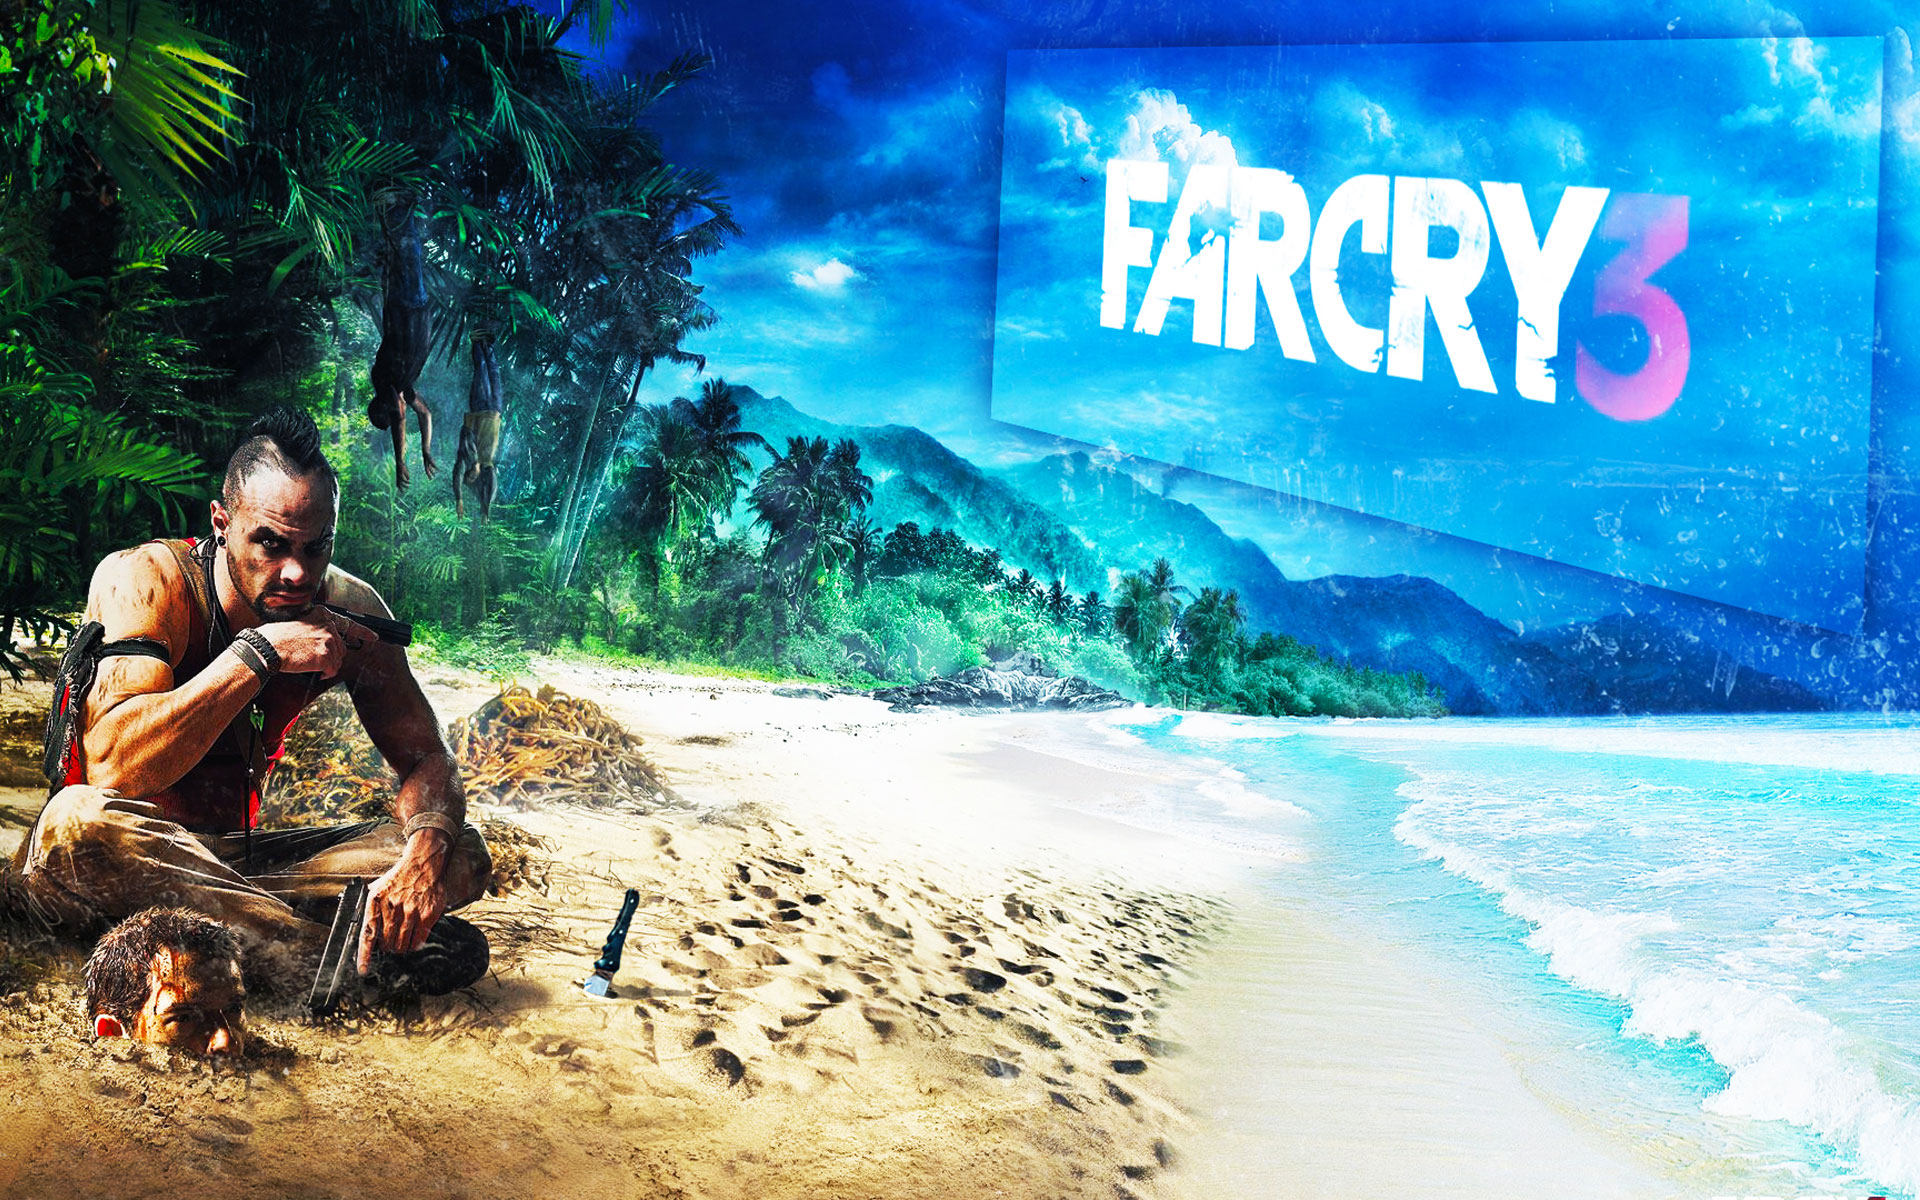 Far Cry 3 Wallpapers Best Wallpapers HD Wallpapers Download Free Images Wallpaper [wallpaper981.blogspot.com]